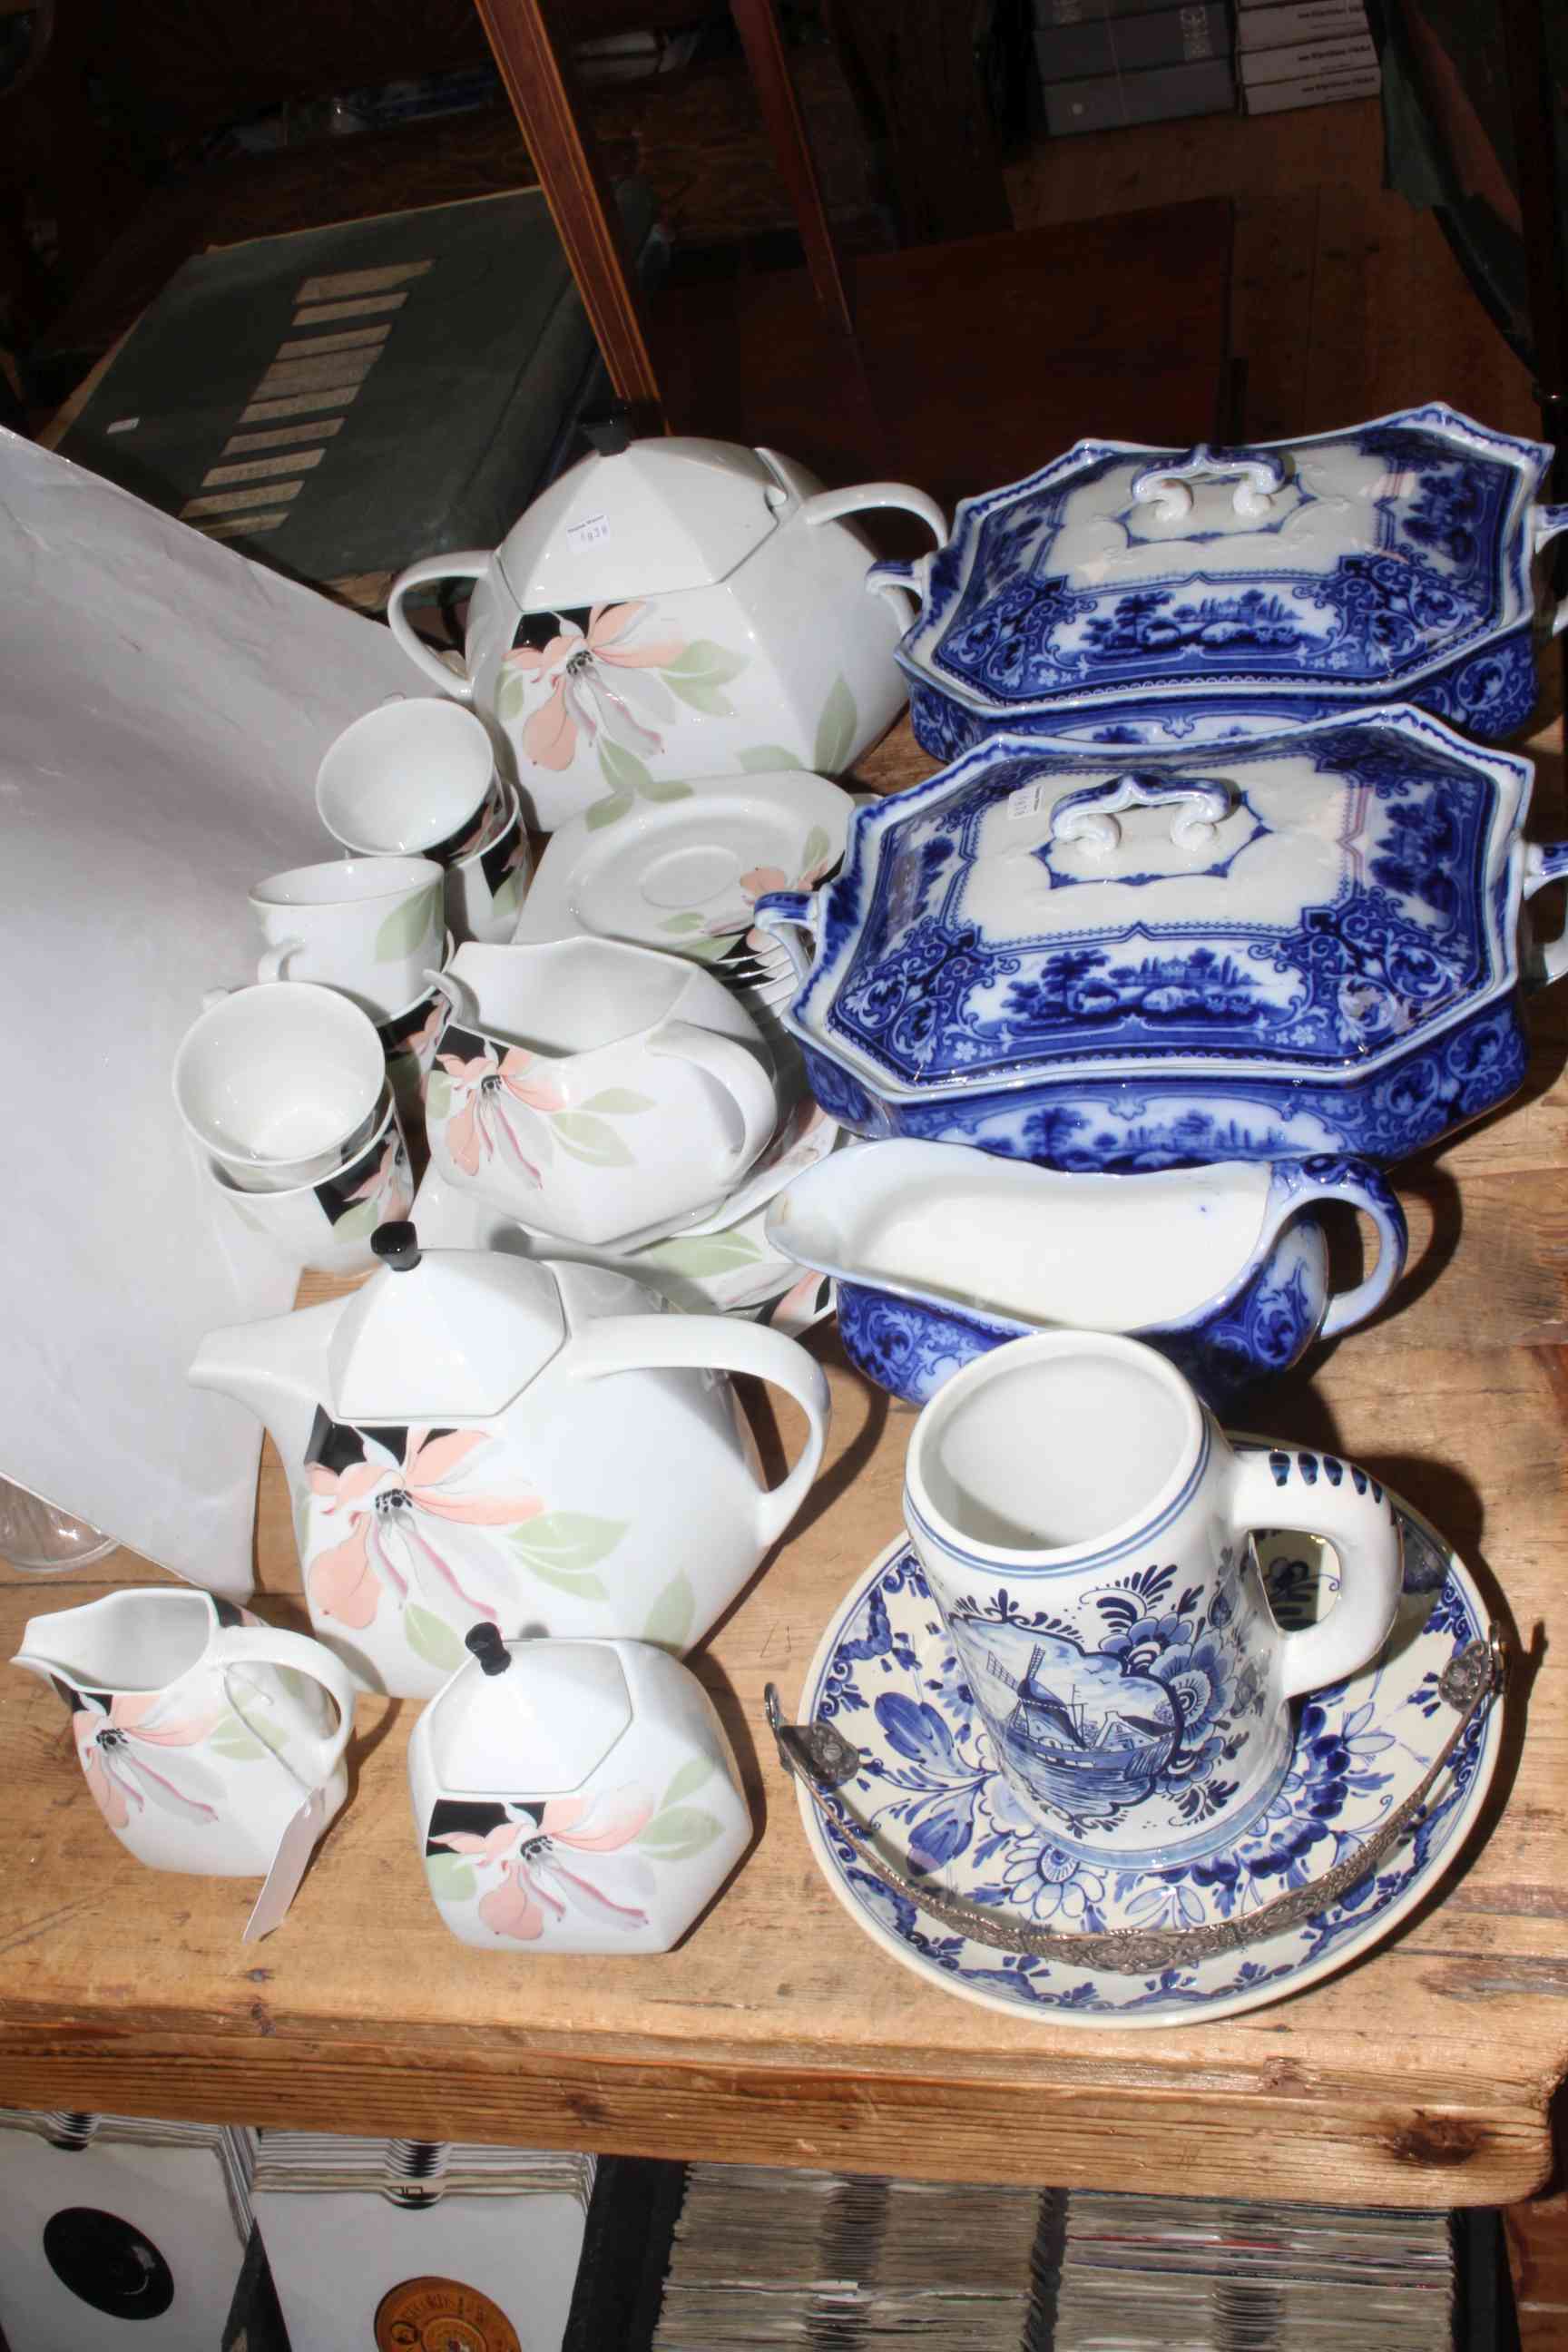 Scherzer Art Deco tea set with two blue and white tureens and others.